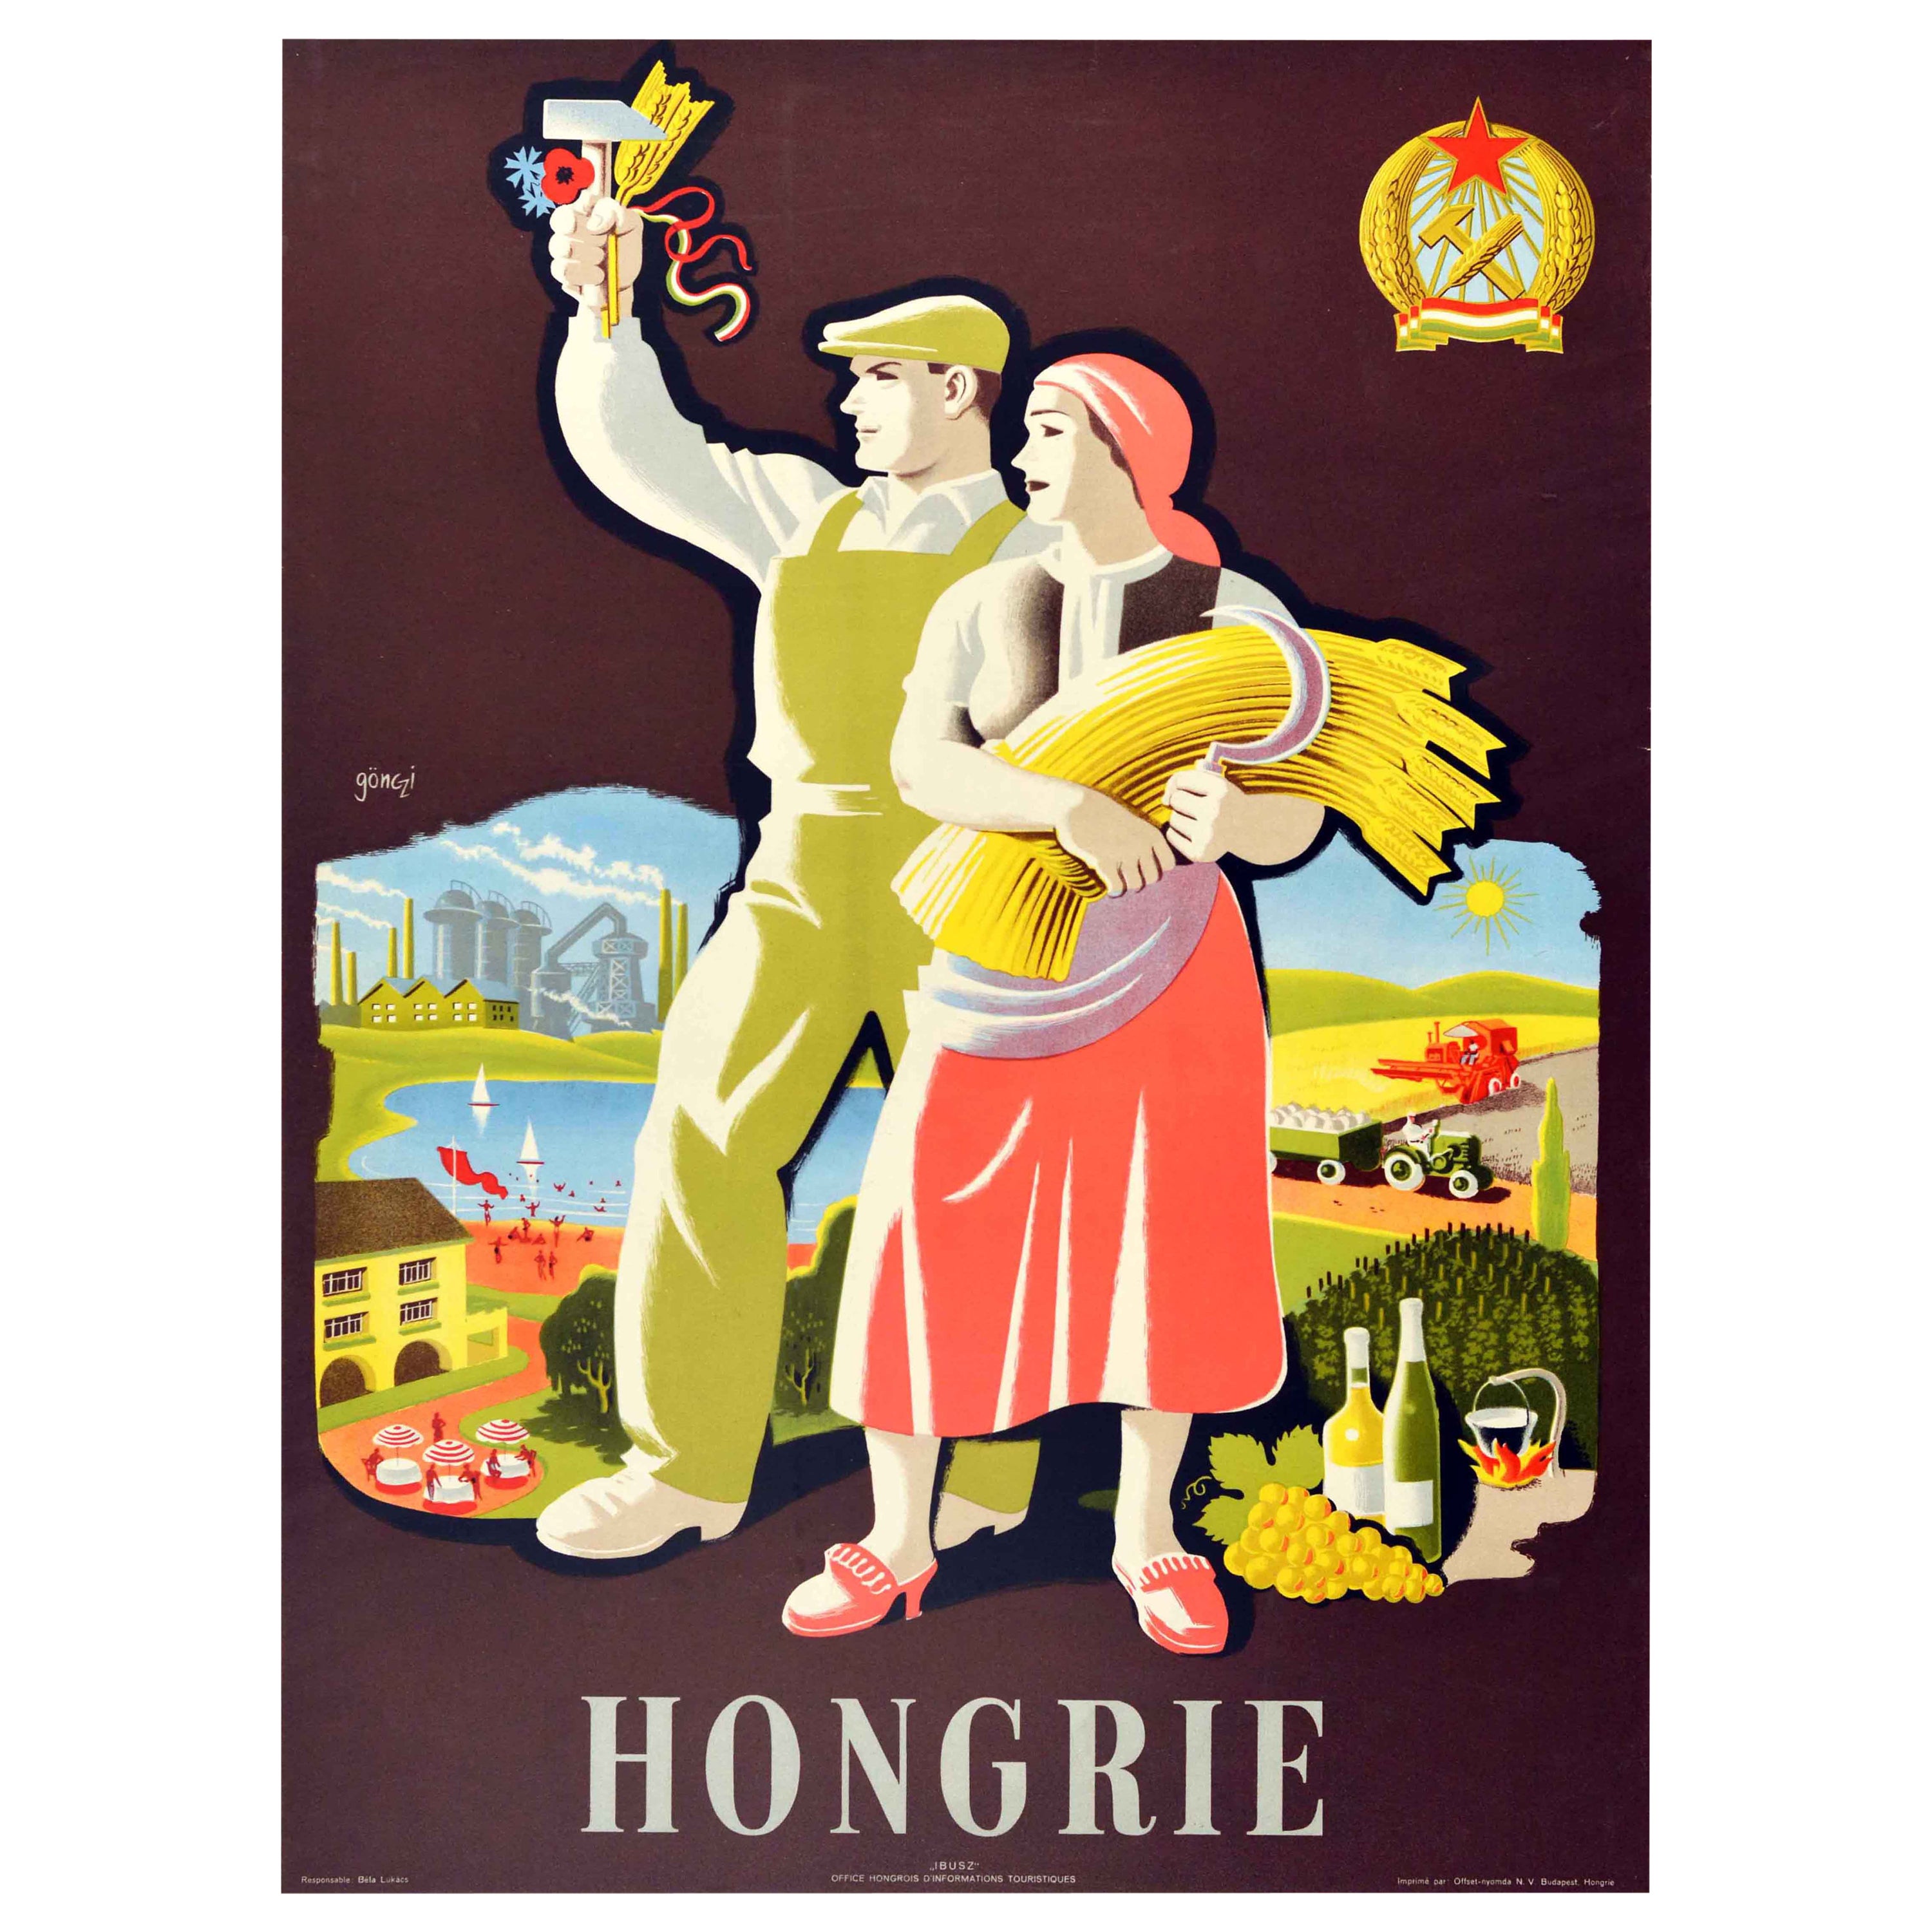 Original Vintage Travel Poster Hongrie Hungary Wine Industry Agriculture Tourism